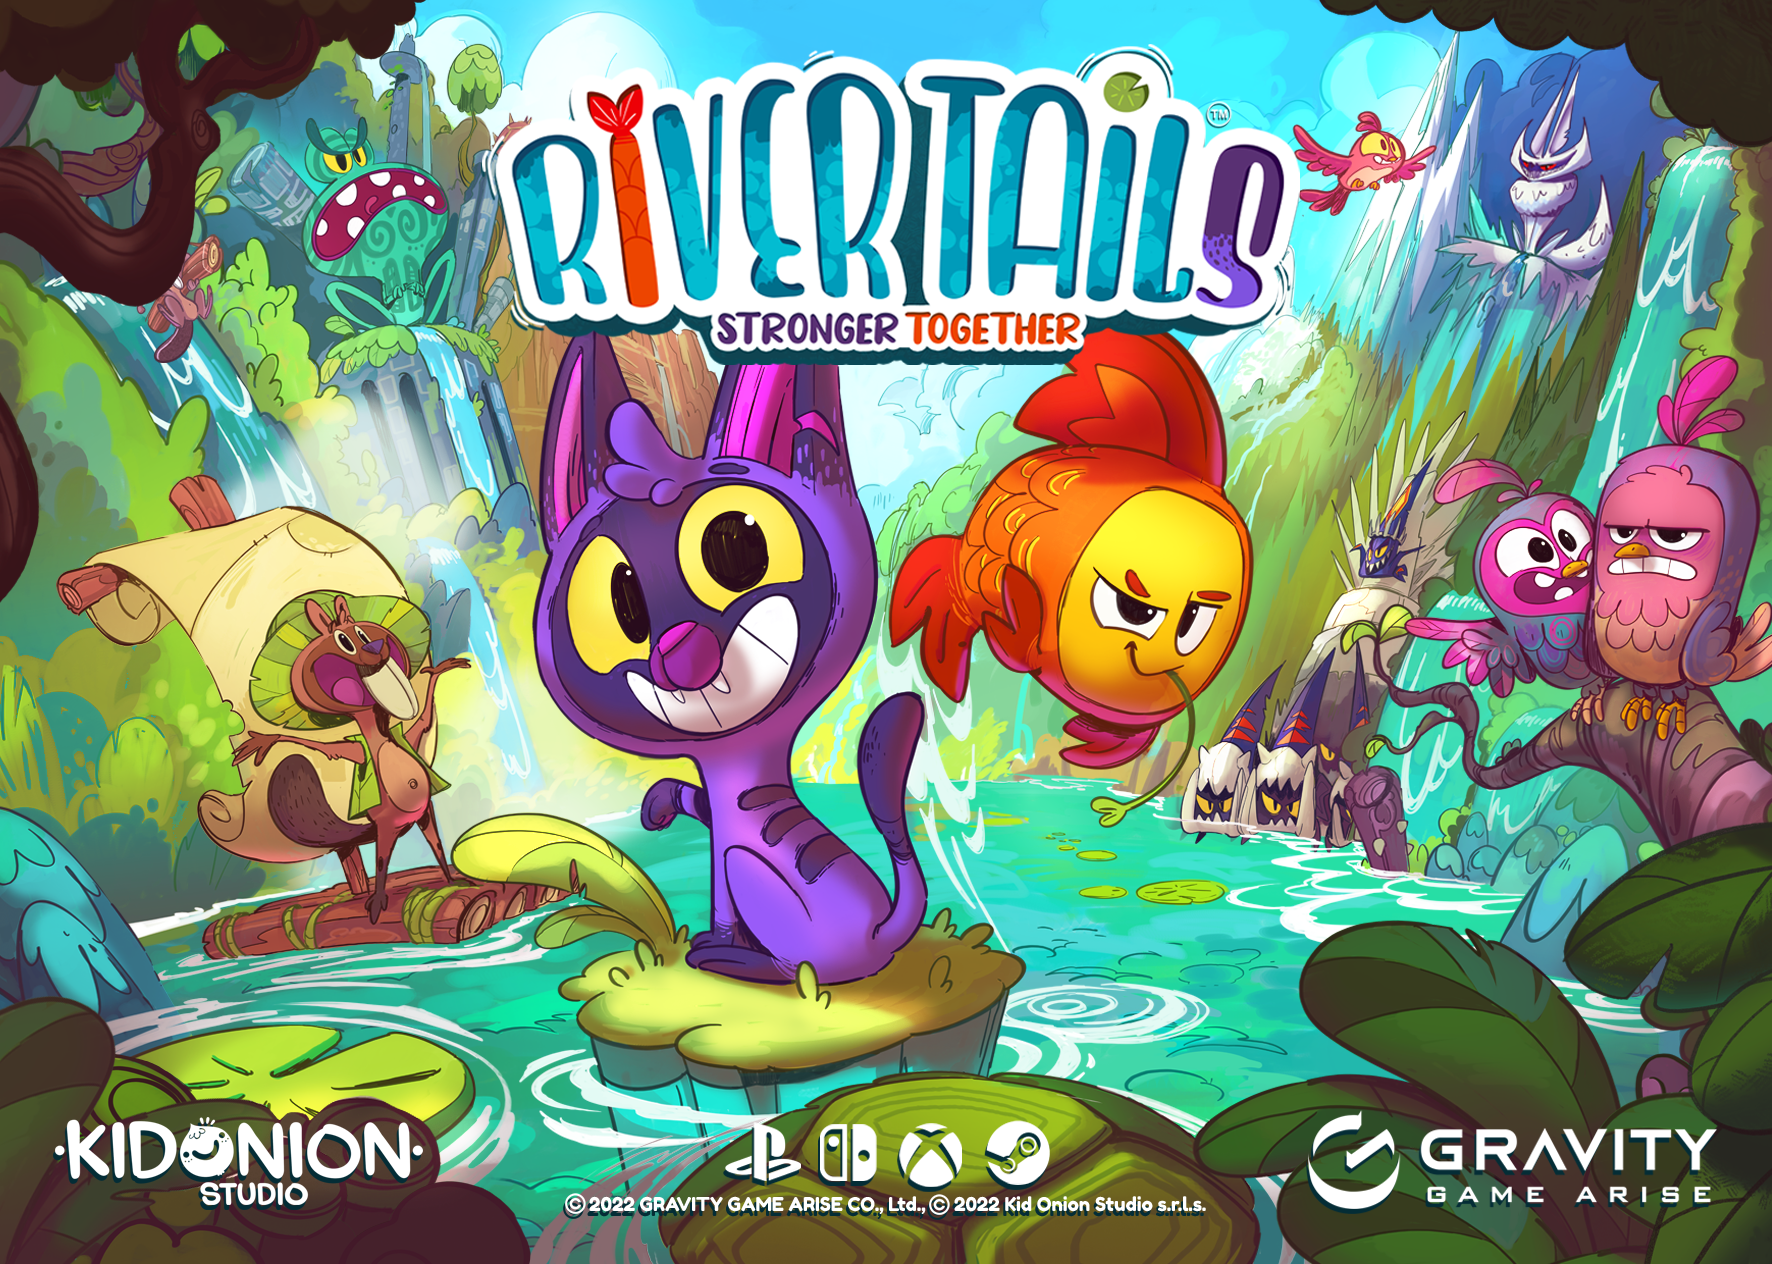 River Tails Early Access, Asian and Italian languages, Steam Summer Sale, upgrades, new demo